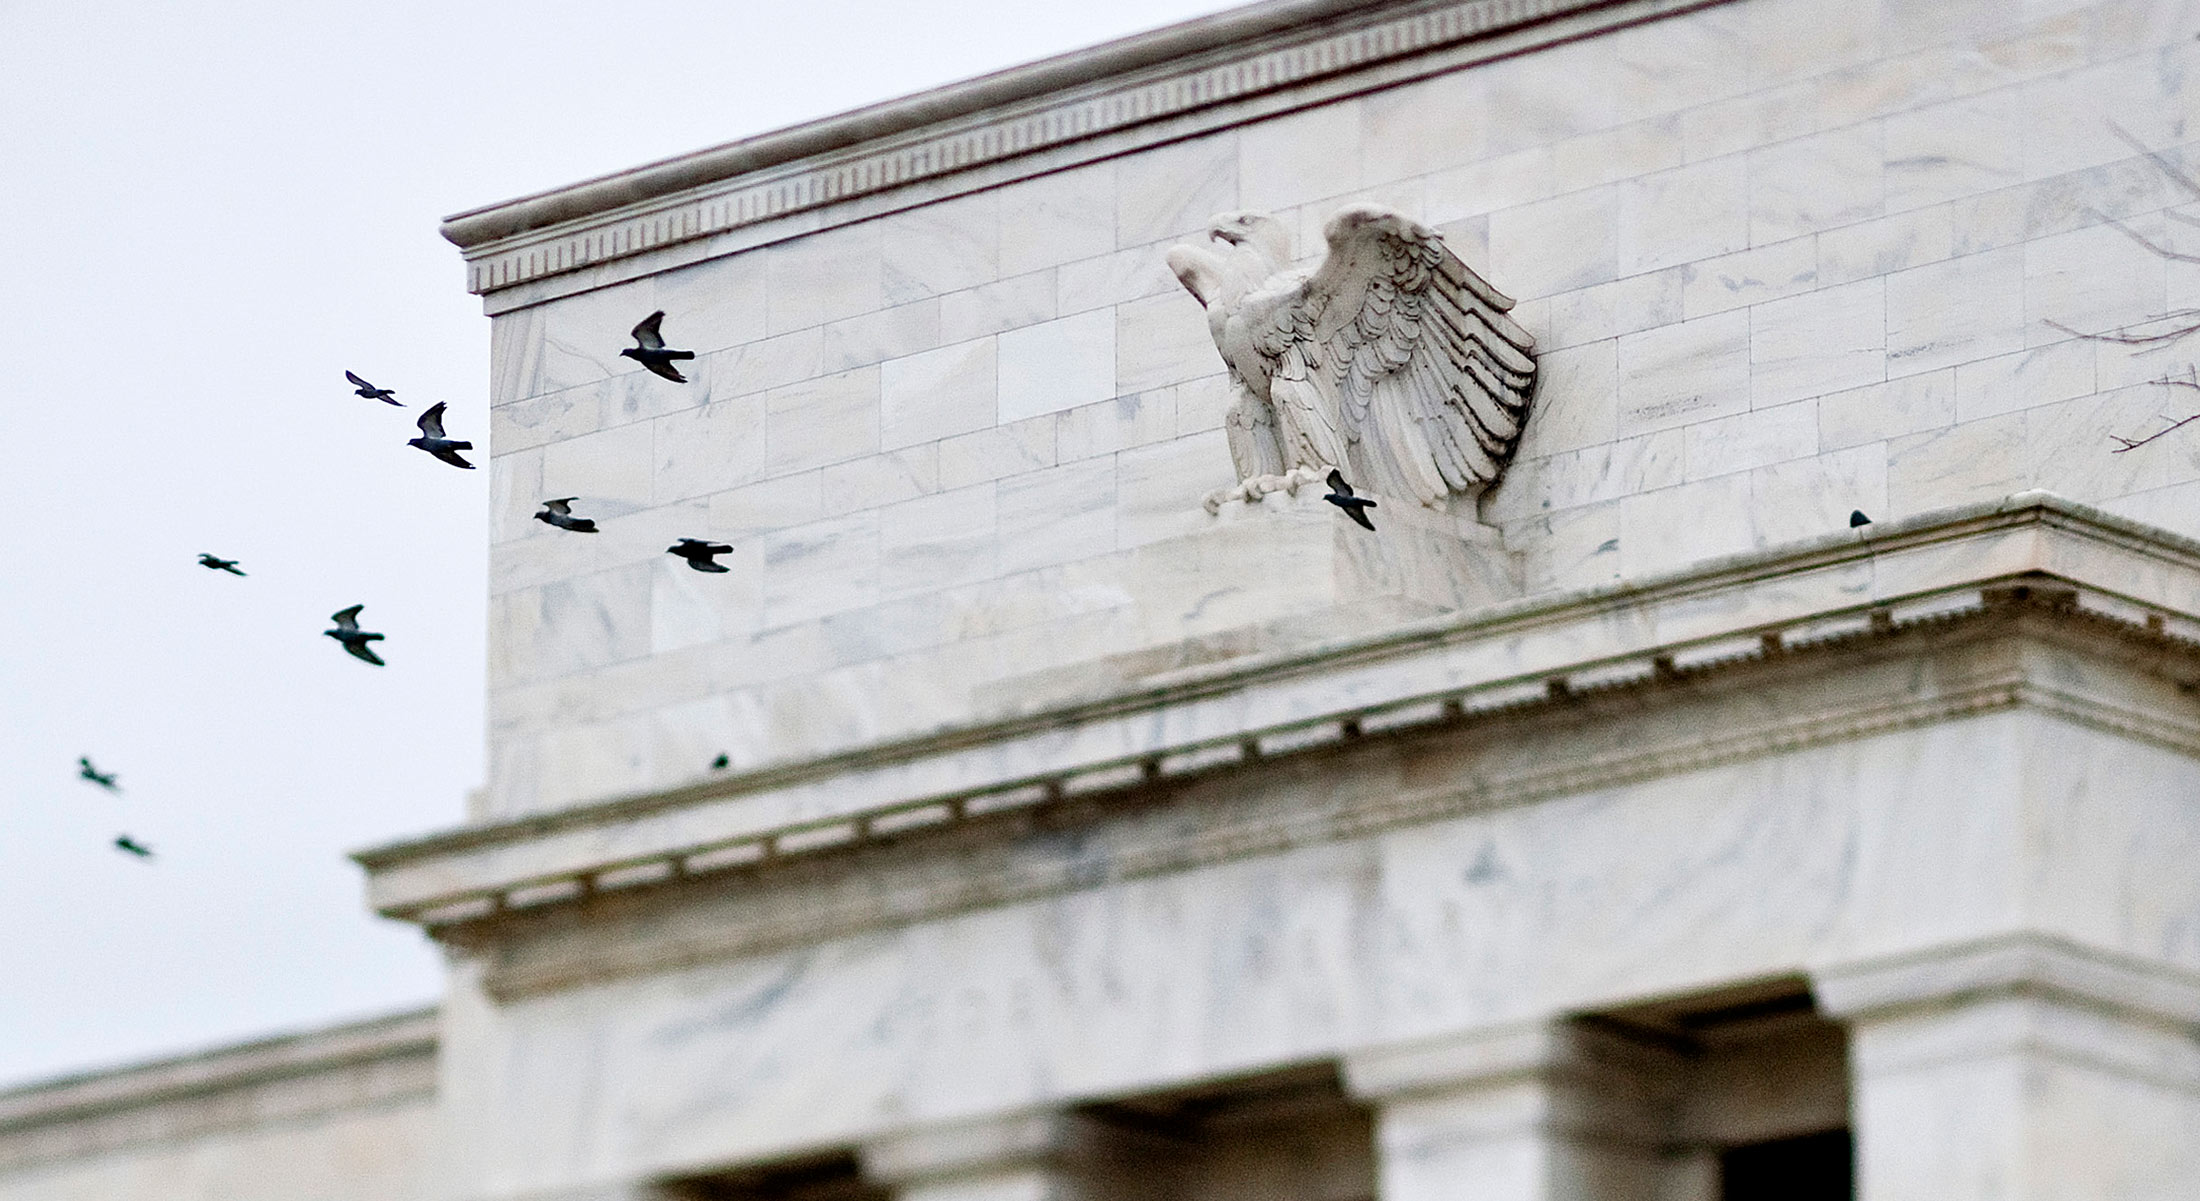 Pigeons fly past the Marriner S. Eccles Federal Reserve Board Building in Washington, D.C., U.S., on Tuesday, Nov. 30, 2010.
